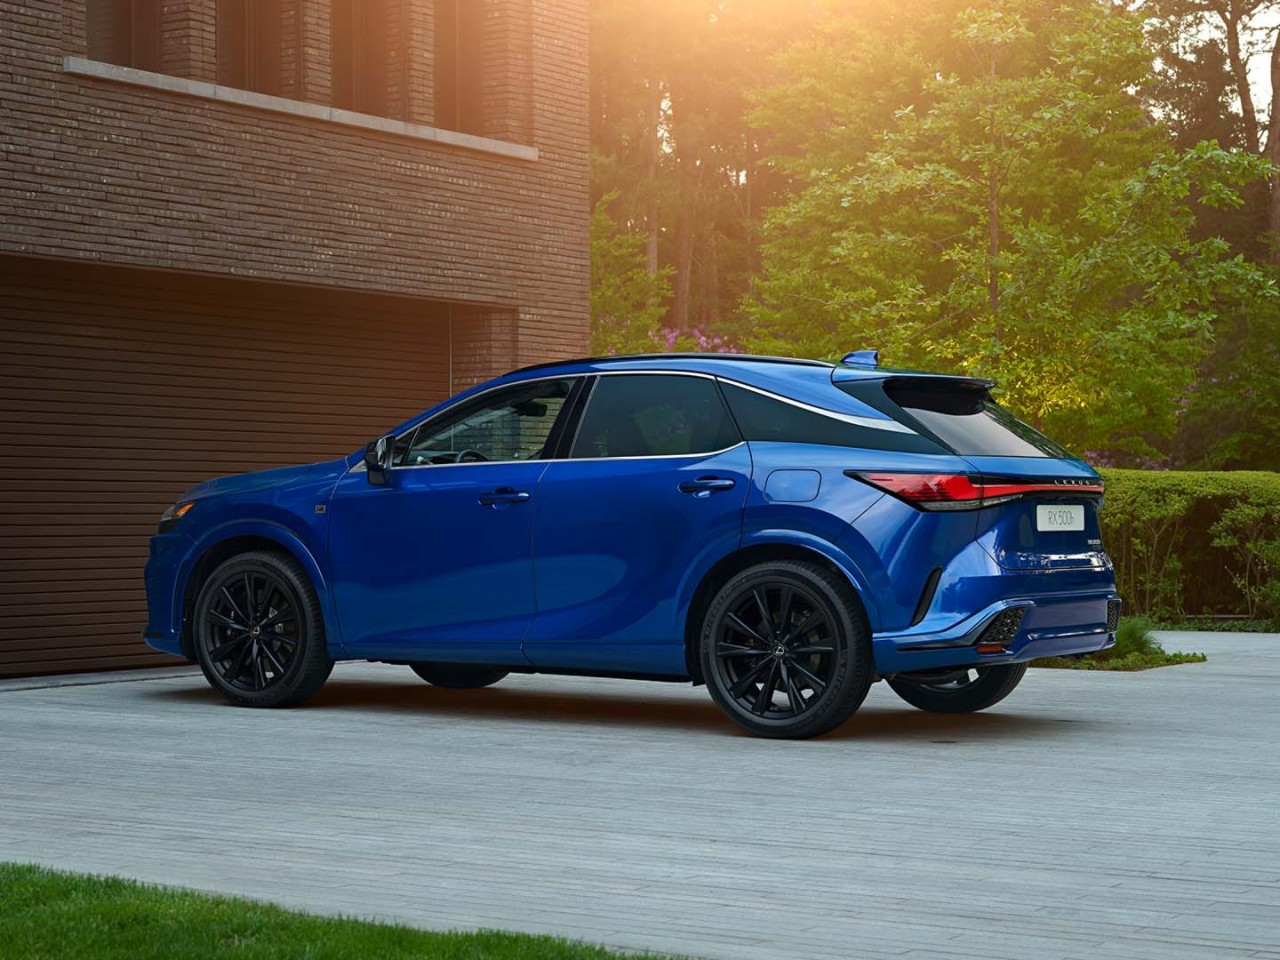 Side view of the Lexus RX 500h parked on a driveway 